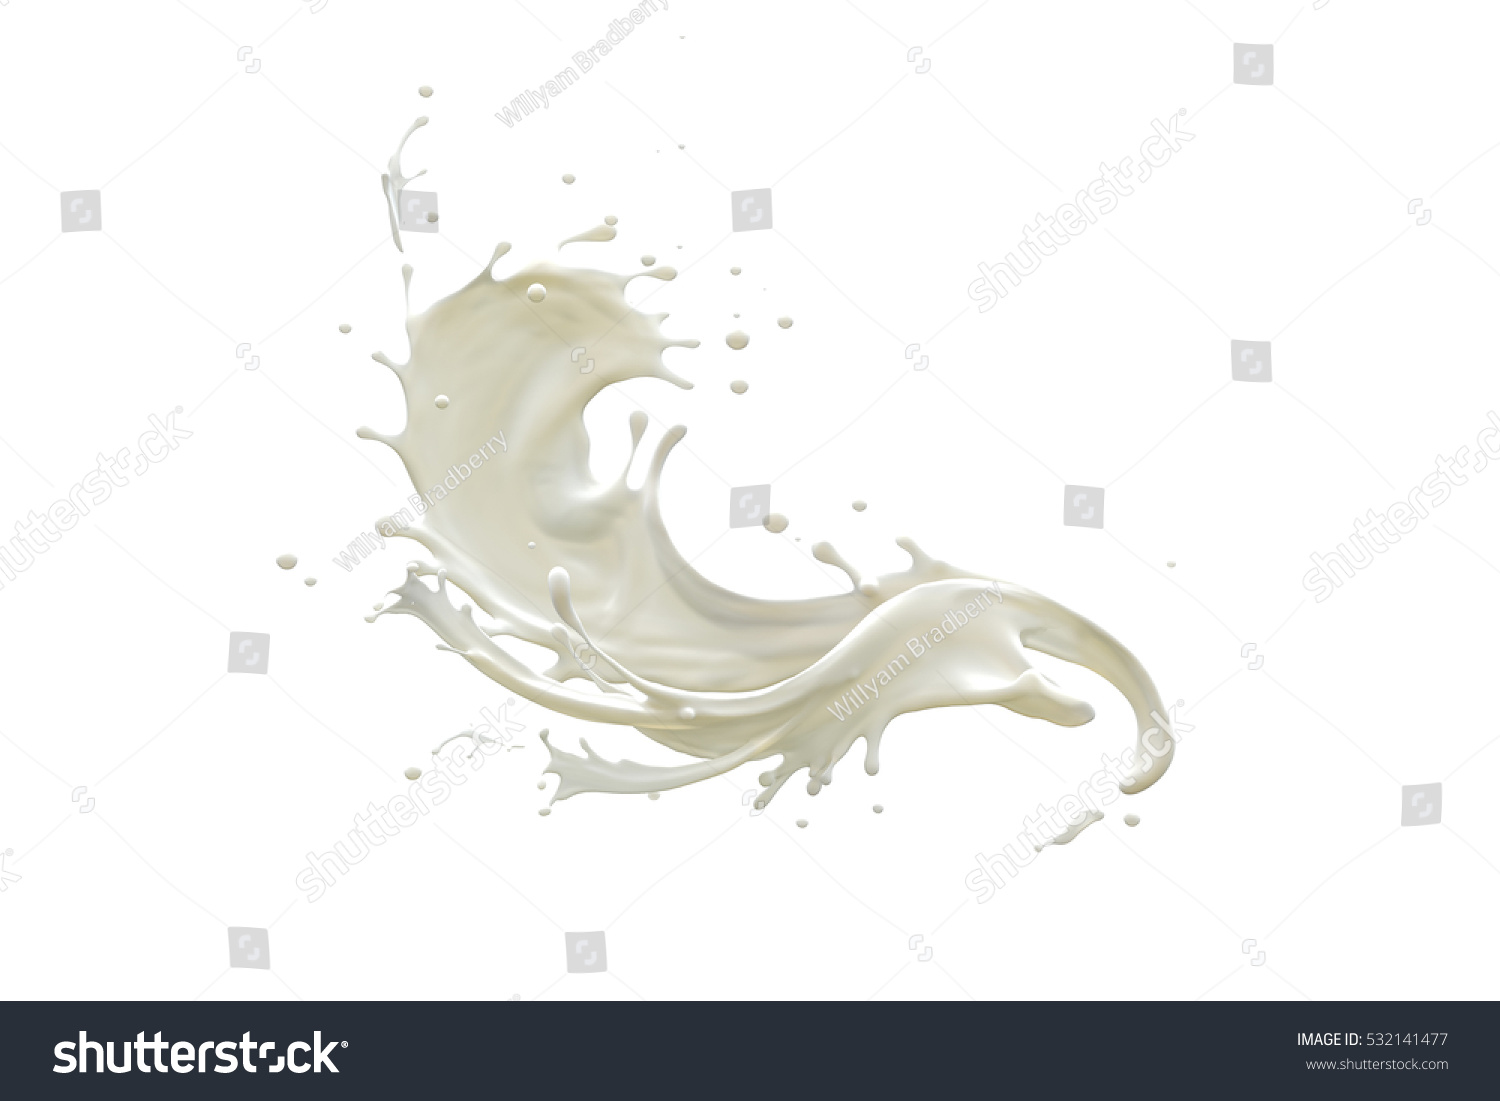 Milk drops and splashes isolated on white background.  #532141477